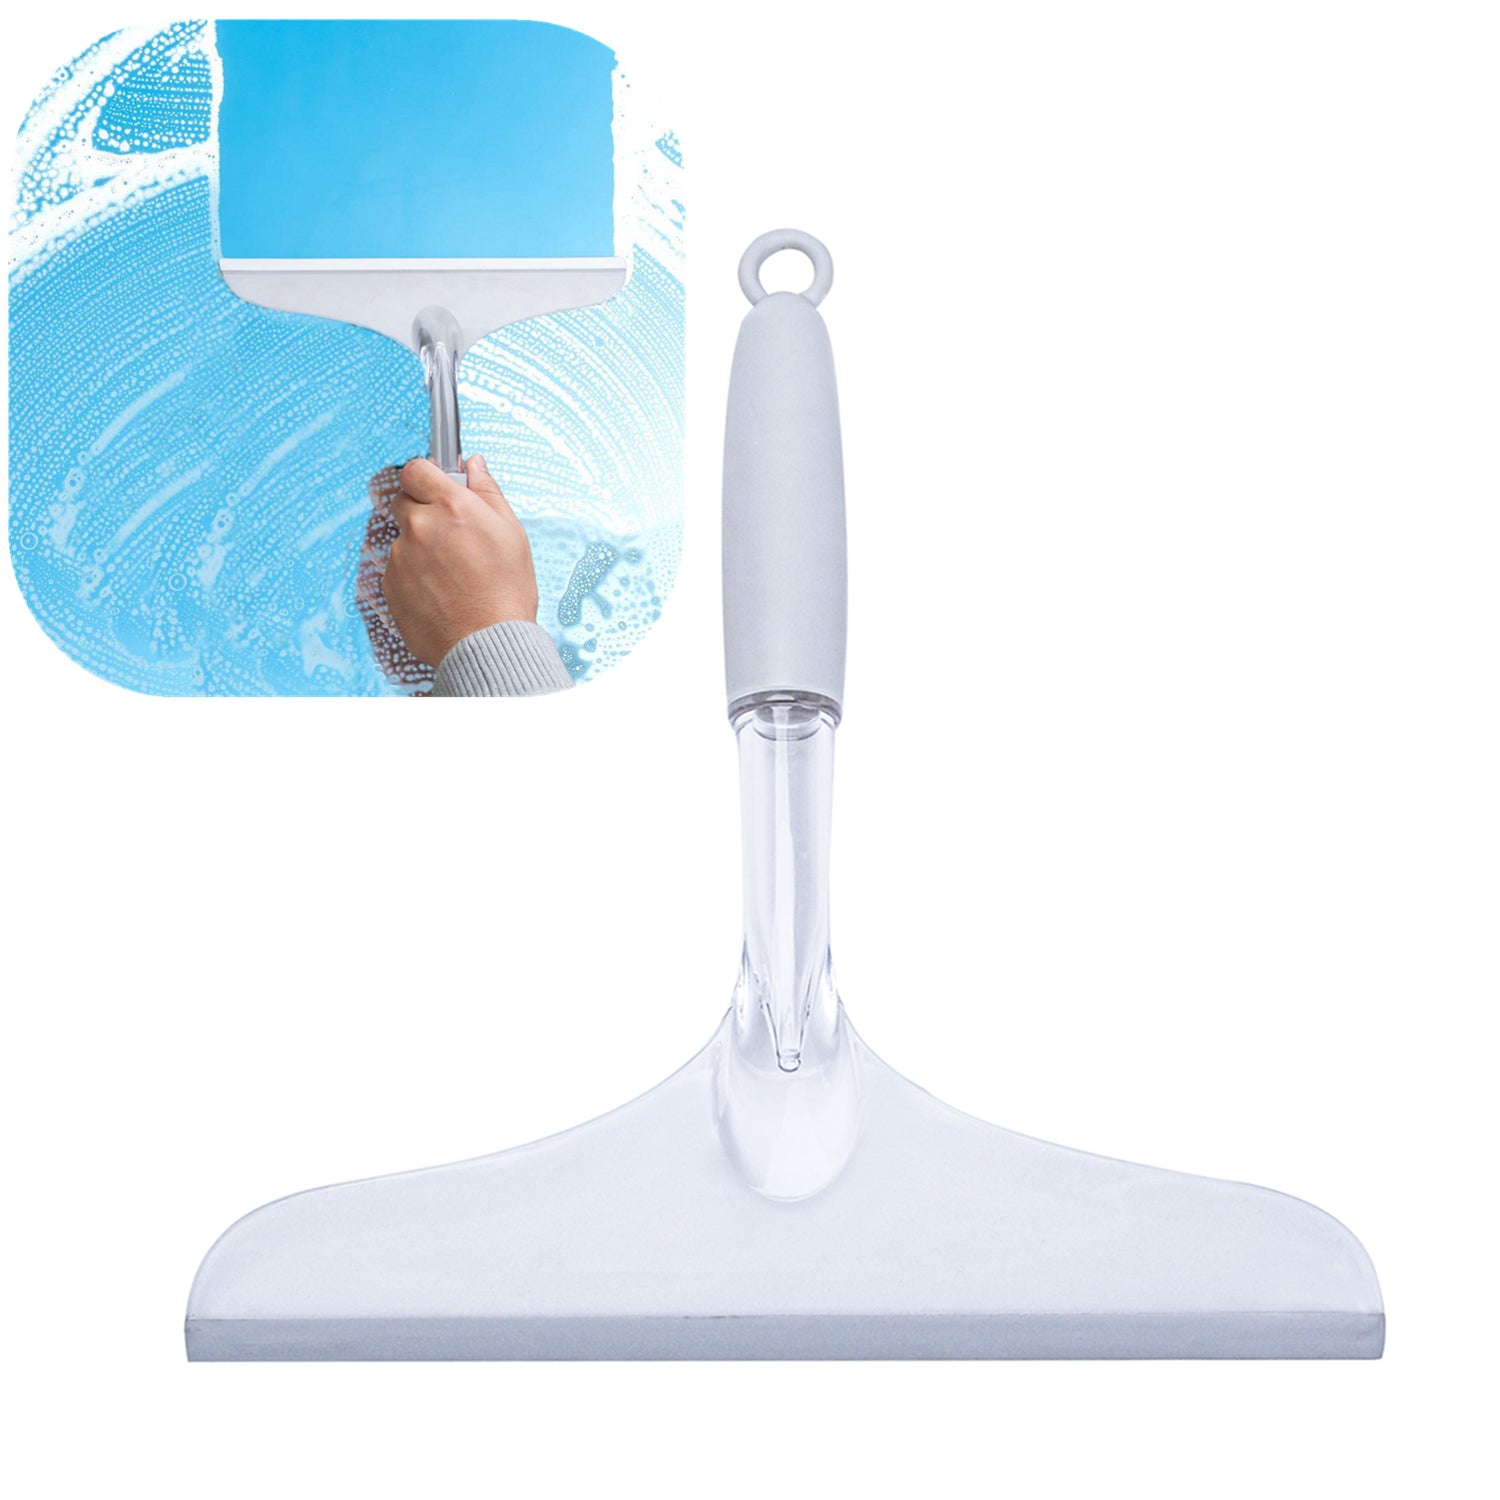 Bathroom Squeegee For Shower Silicone Squeegee Board Glass Wiper